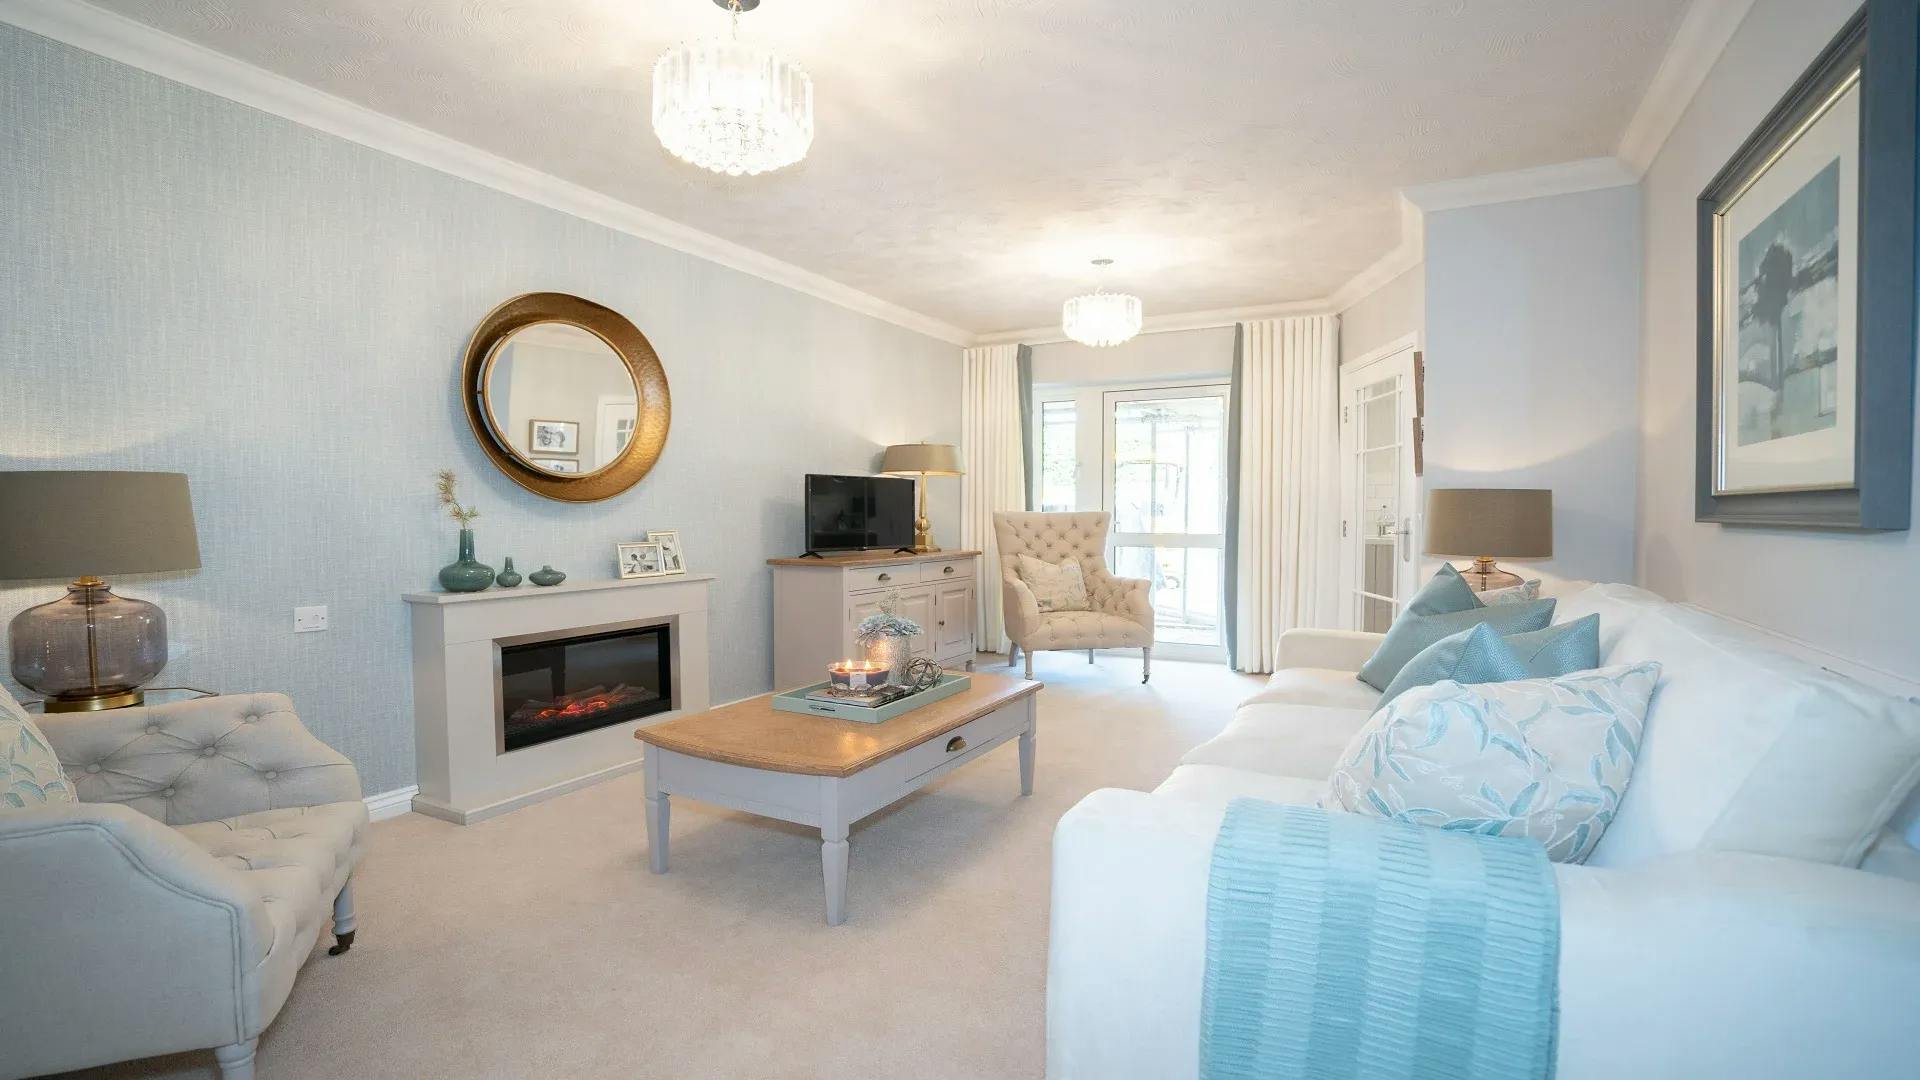 Lounge of Tebbutt Lodge Care Home in Market Borough, Leicestershire 